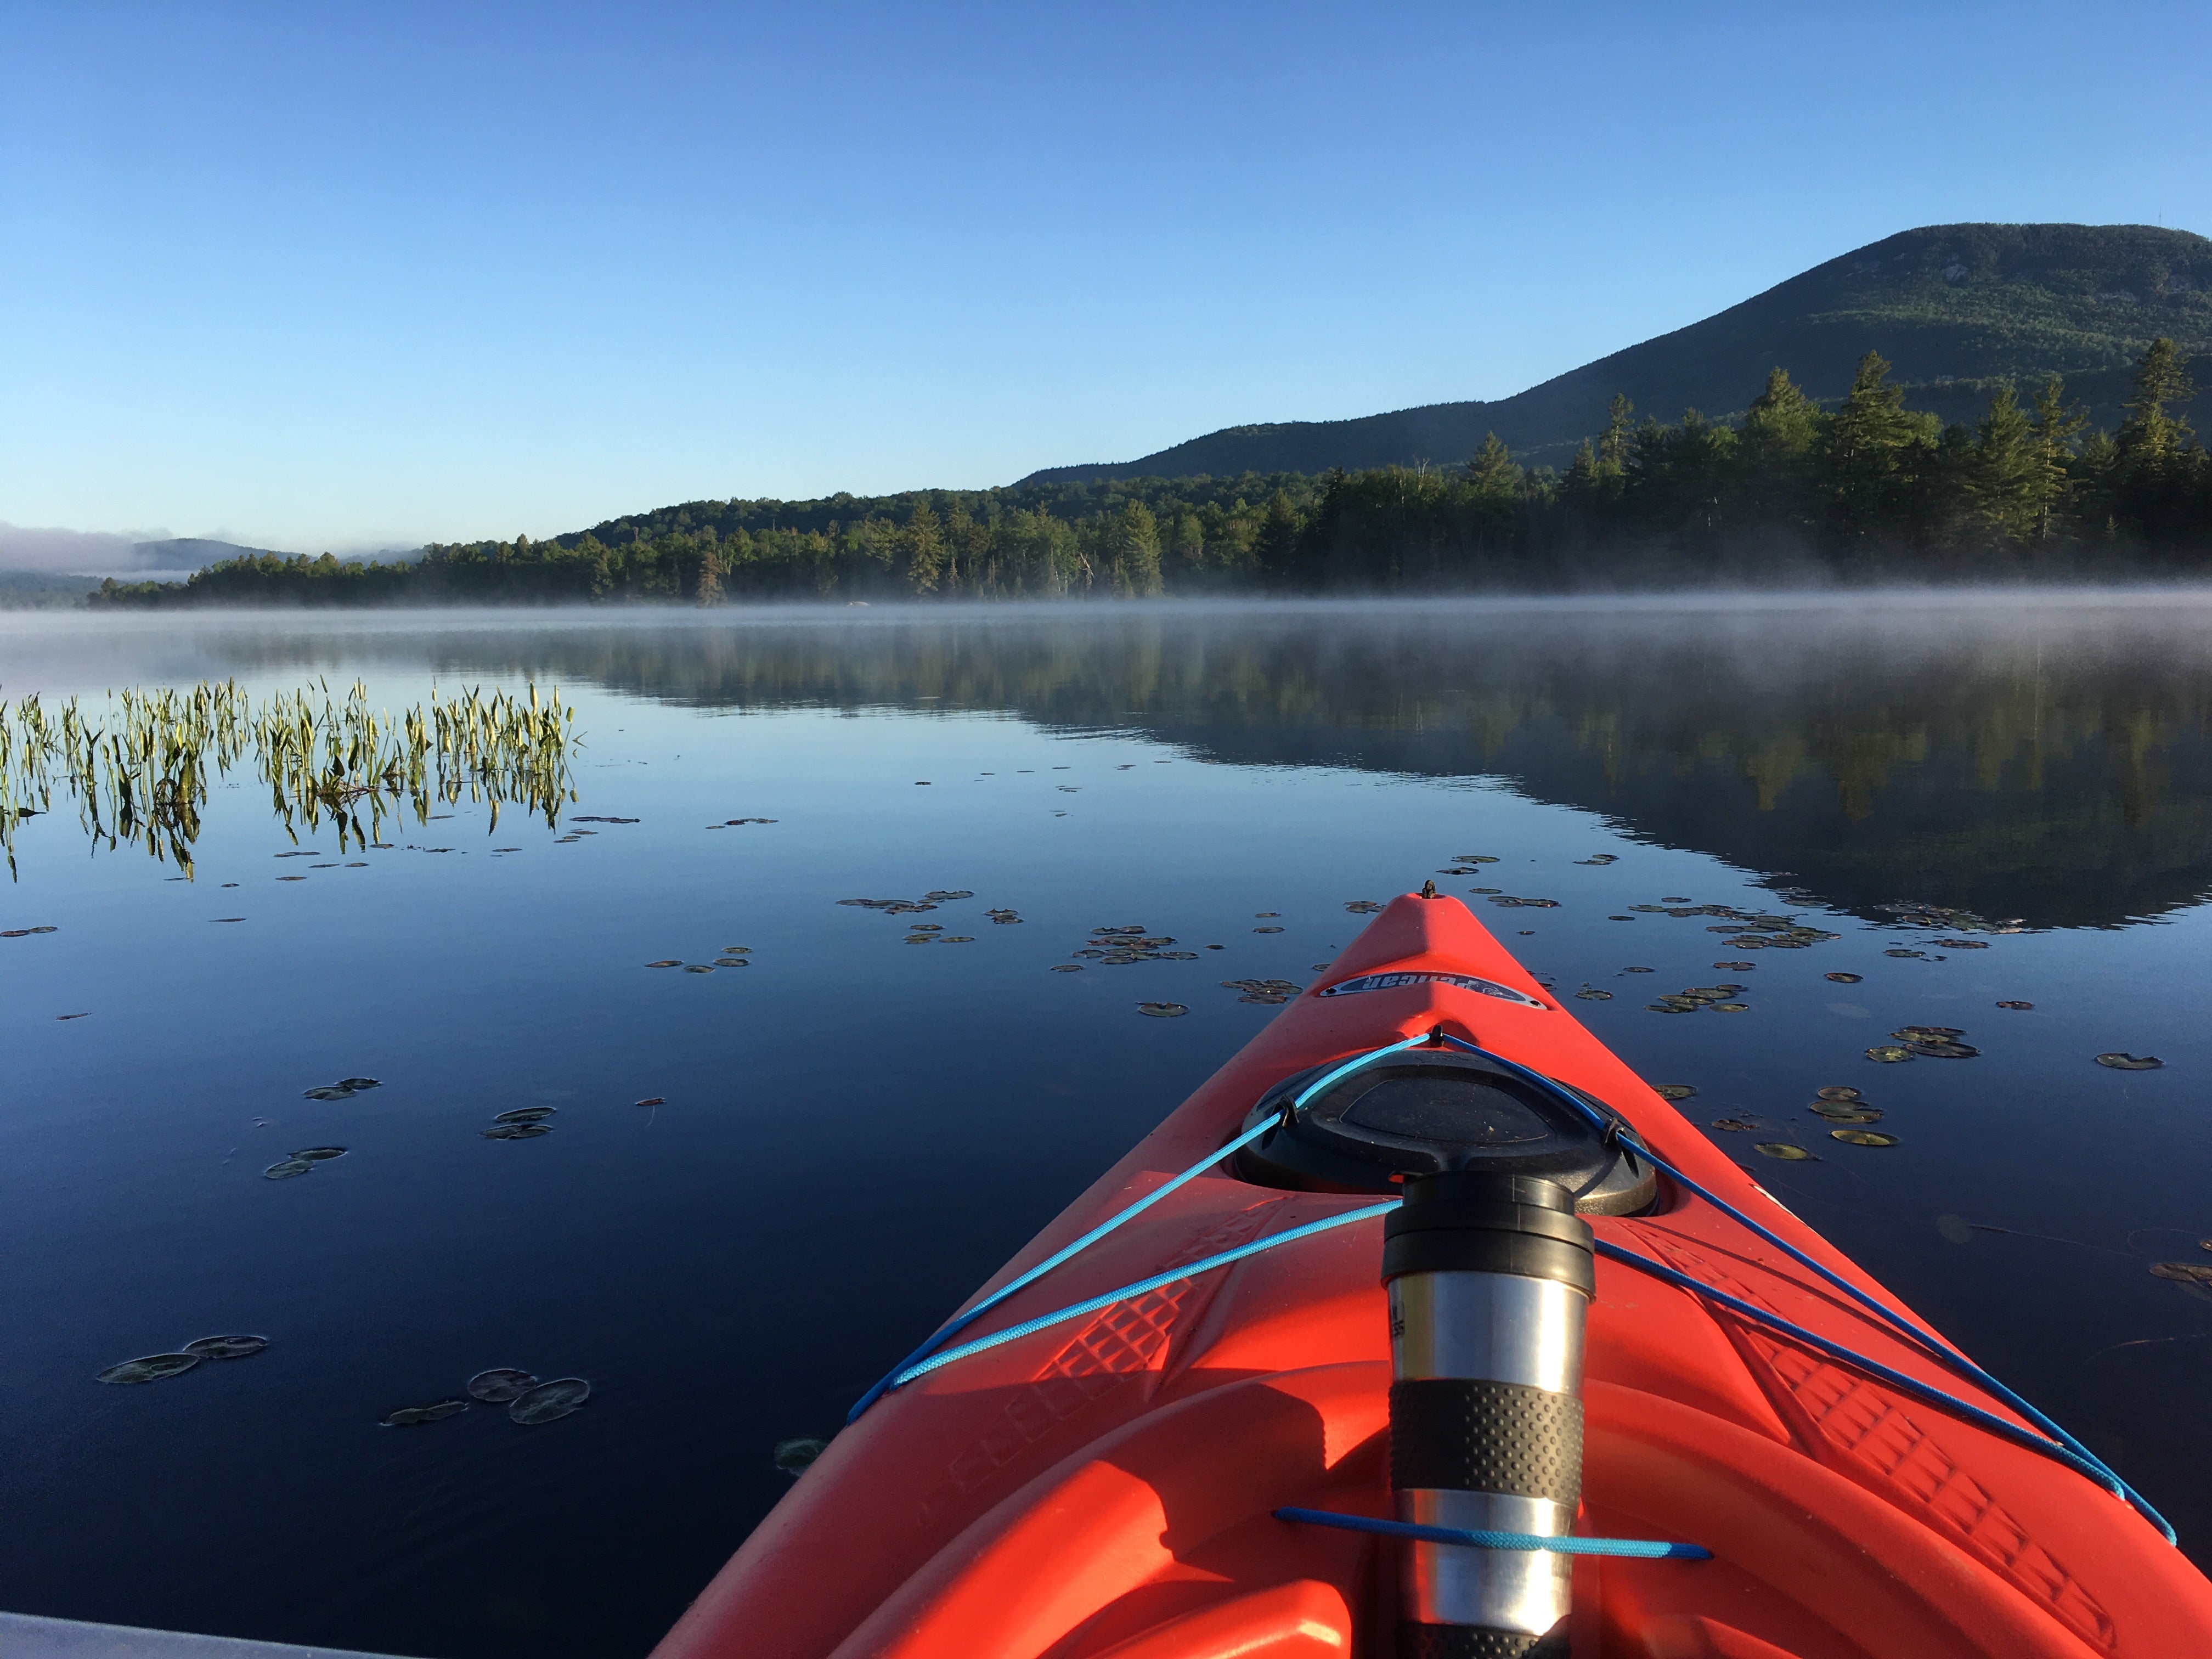 Camper submitted image from Lake Durant Adirondack Preserve - 5